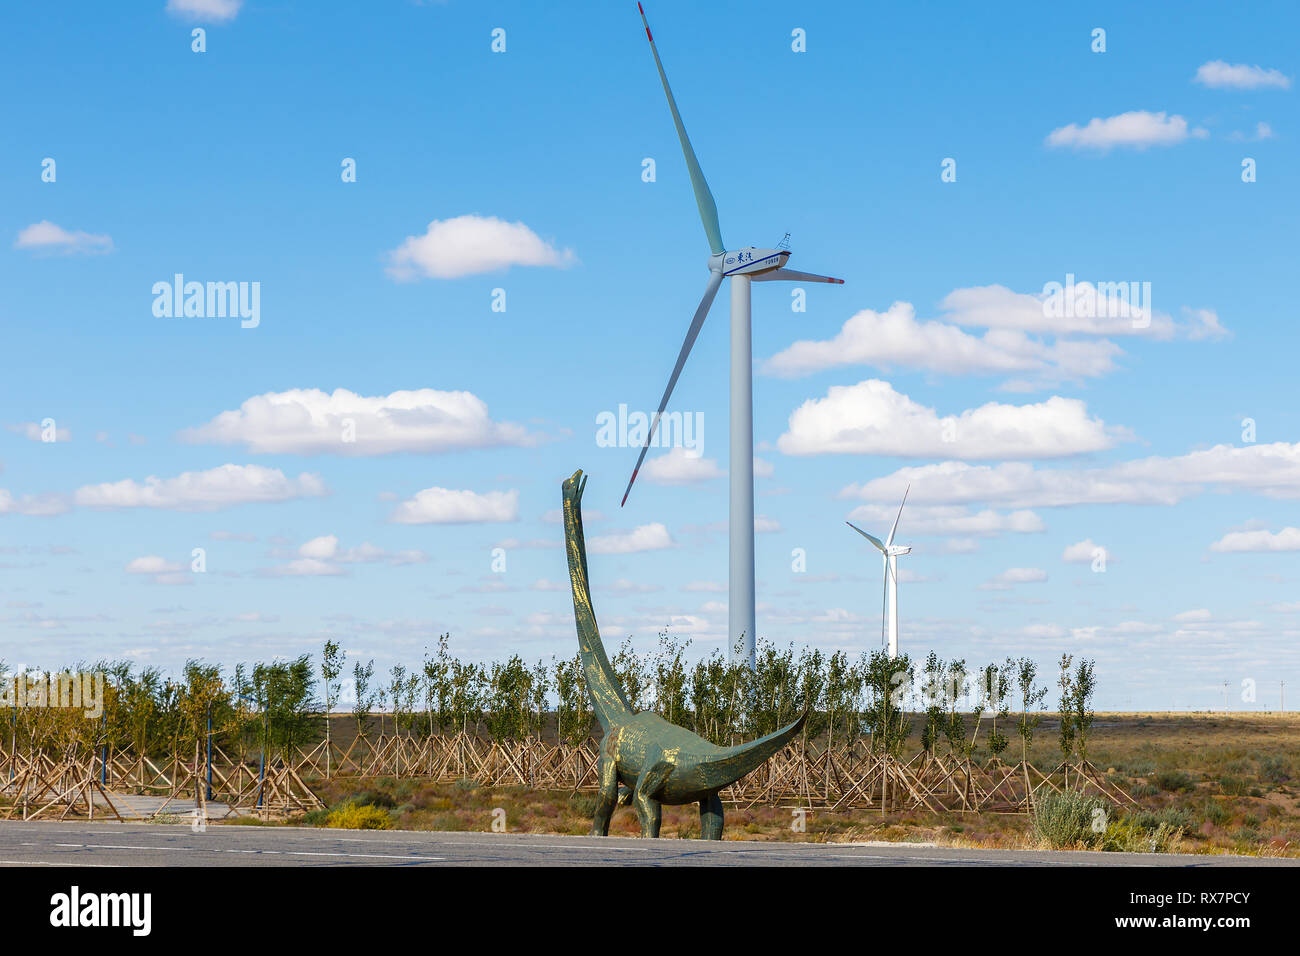 Erenhot, China - September 23, 2018: Dinosaur metal sculpture. Dinosaur  looks at the wind generator in the steppe Stock Photo - Alamy